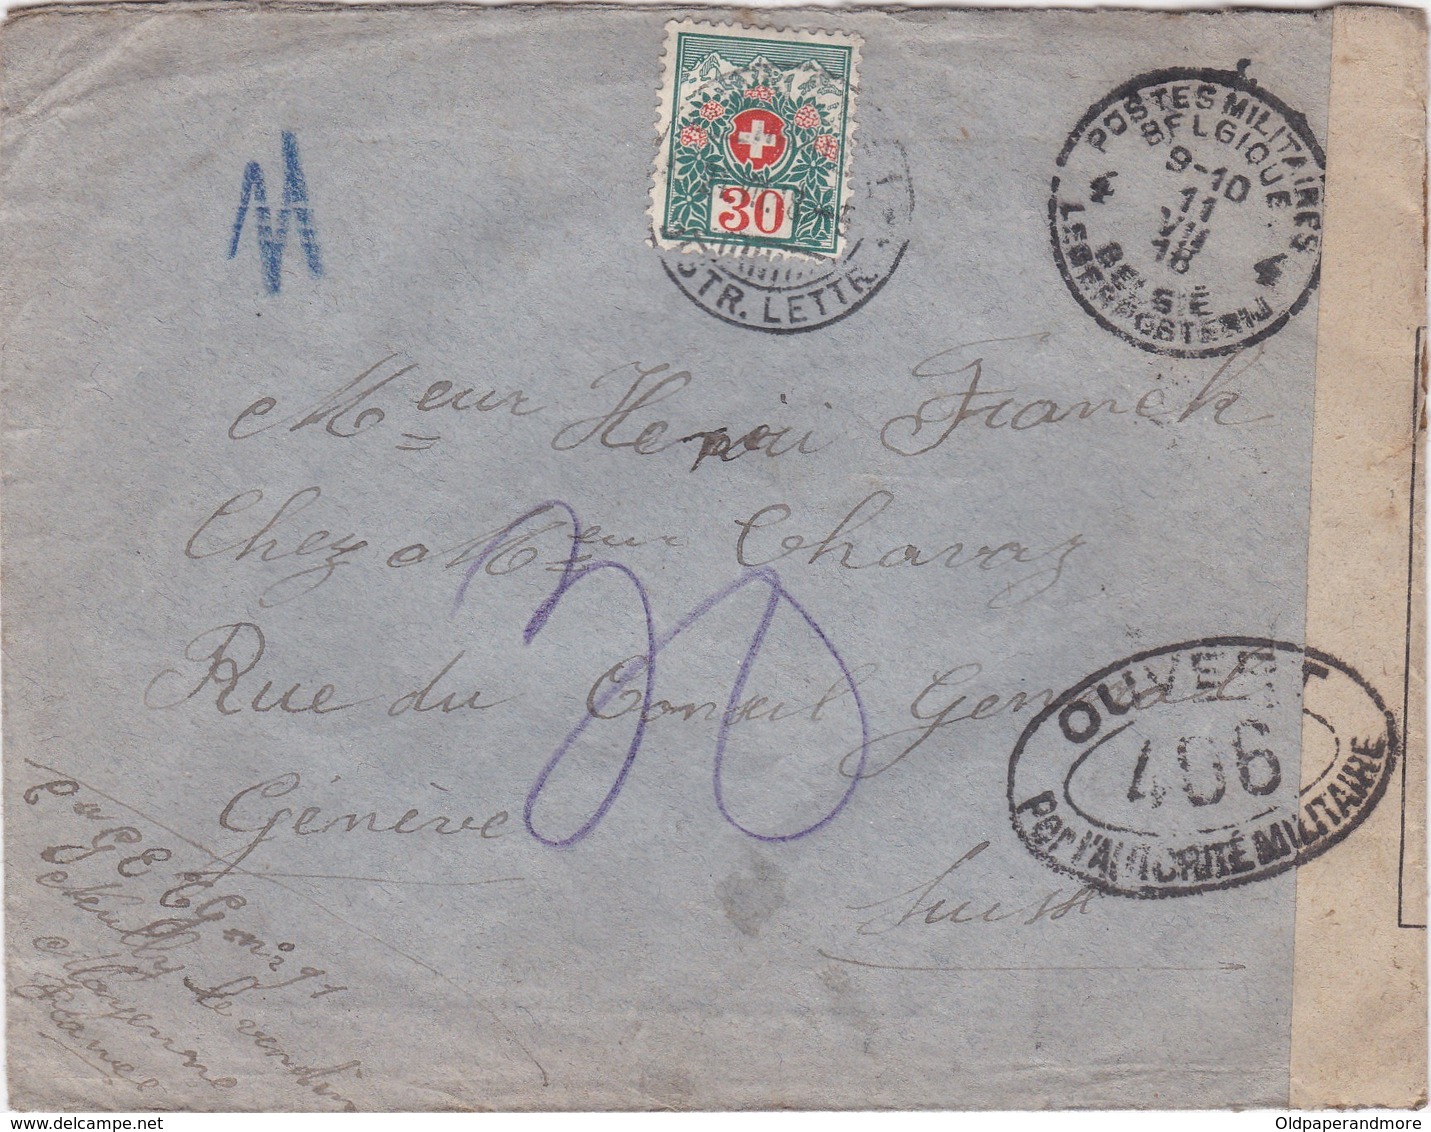 BELGIQUE - CIRCULATED  AND CENSURED COVER - RED CROSS REVENUE - MILITARY CANCEL TO GENEVE SUISSE - SWITZERLAND - Armeestempel